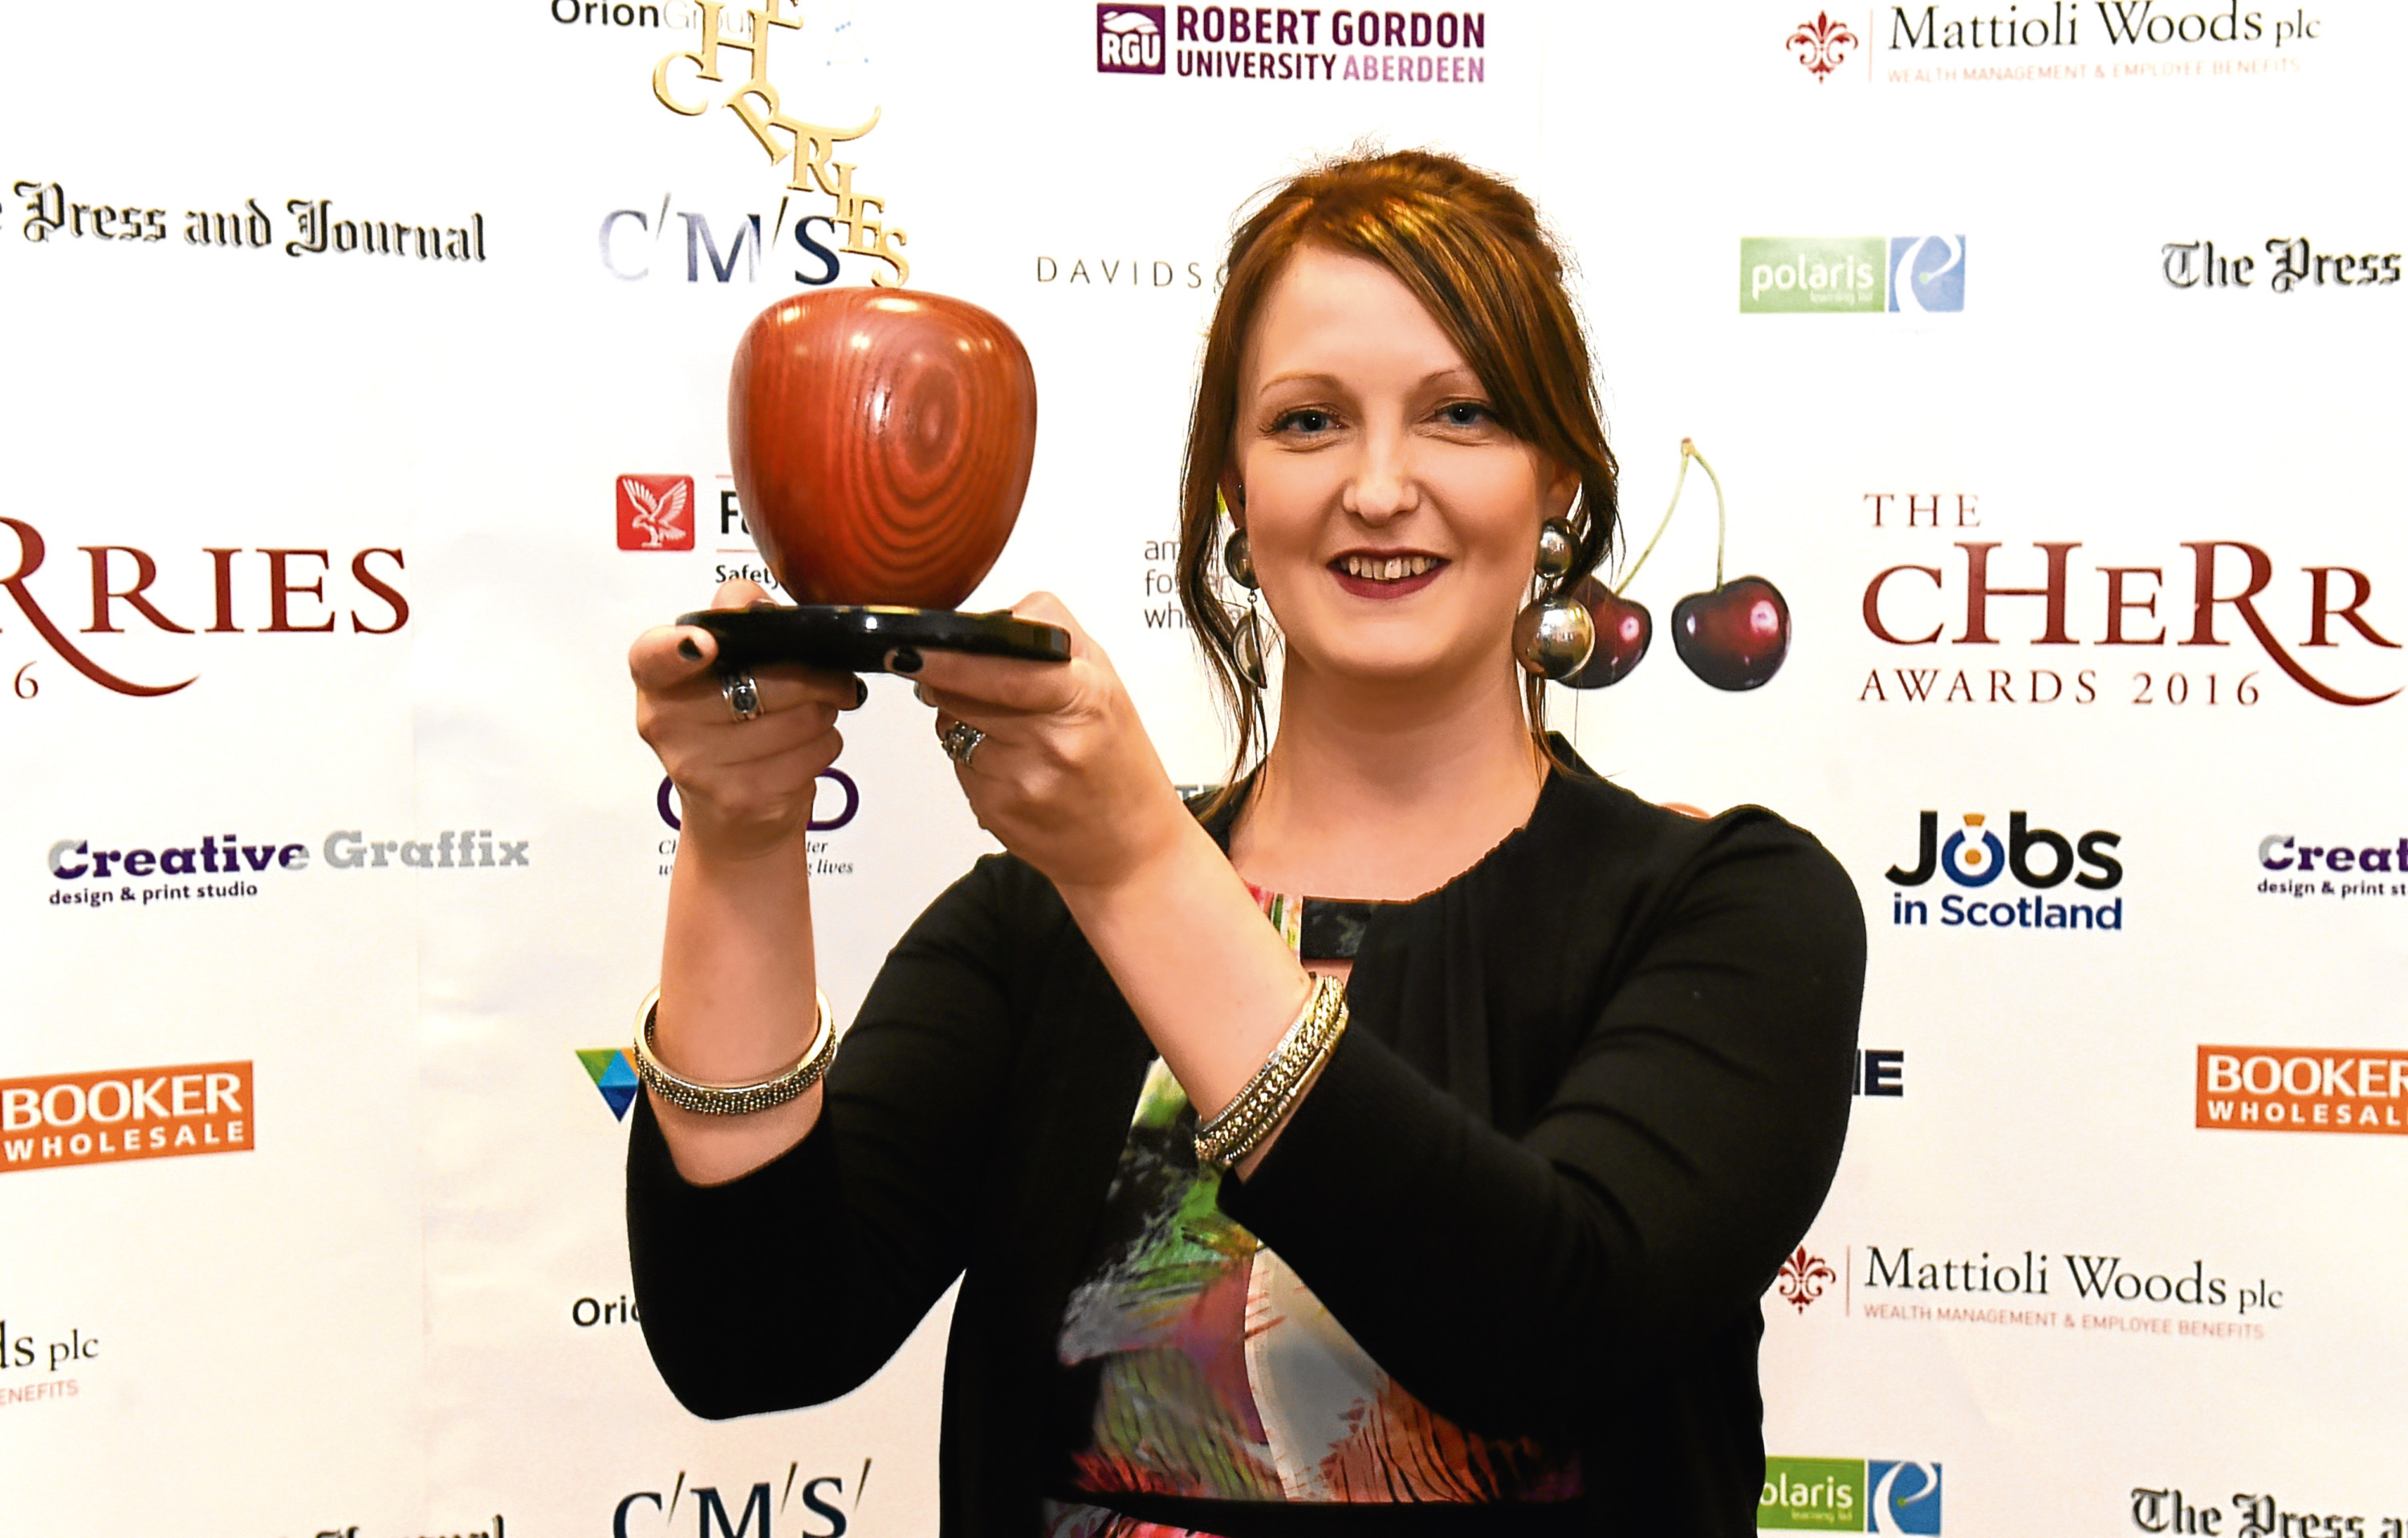 The Cherries Awards 2016 at AECC, Aberdeen. In the picture is The Blossoming award winner, Abigail Mawhirt, Dundee and Angus College. 

Picture by Jim Irvine